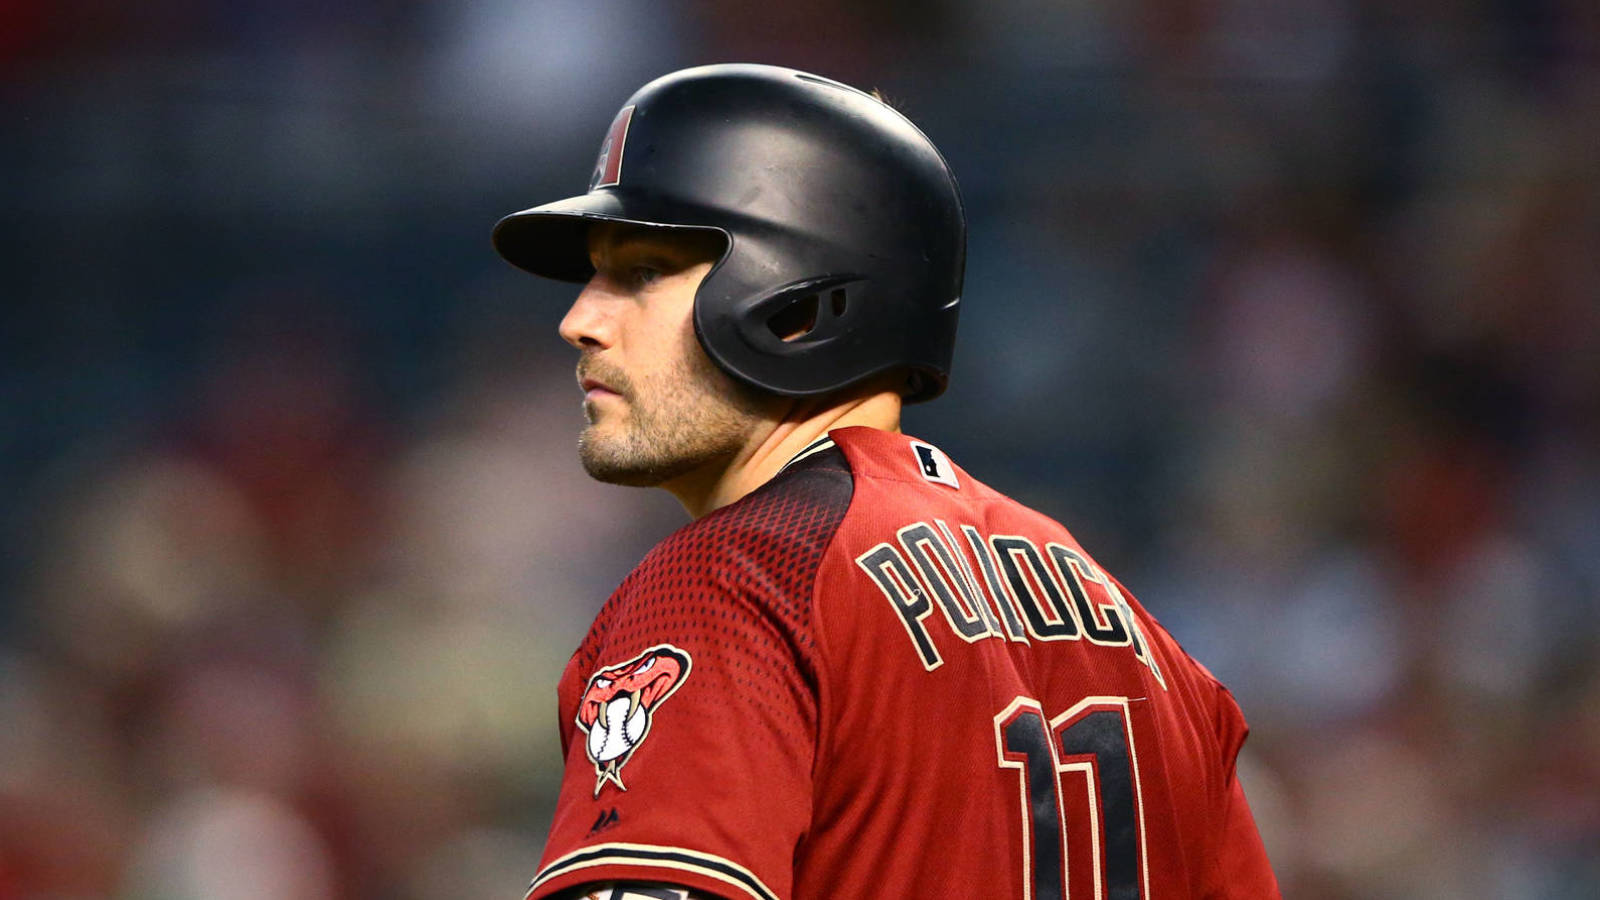 Braves Considering Contract Offer For A J Pollock